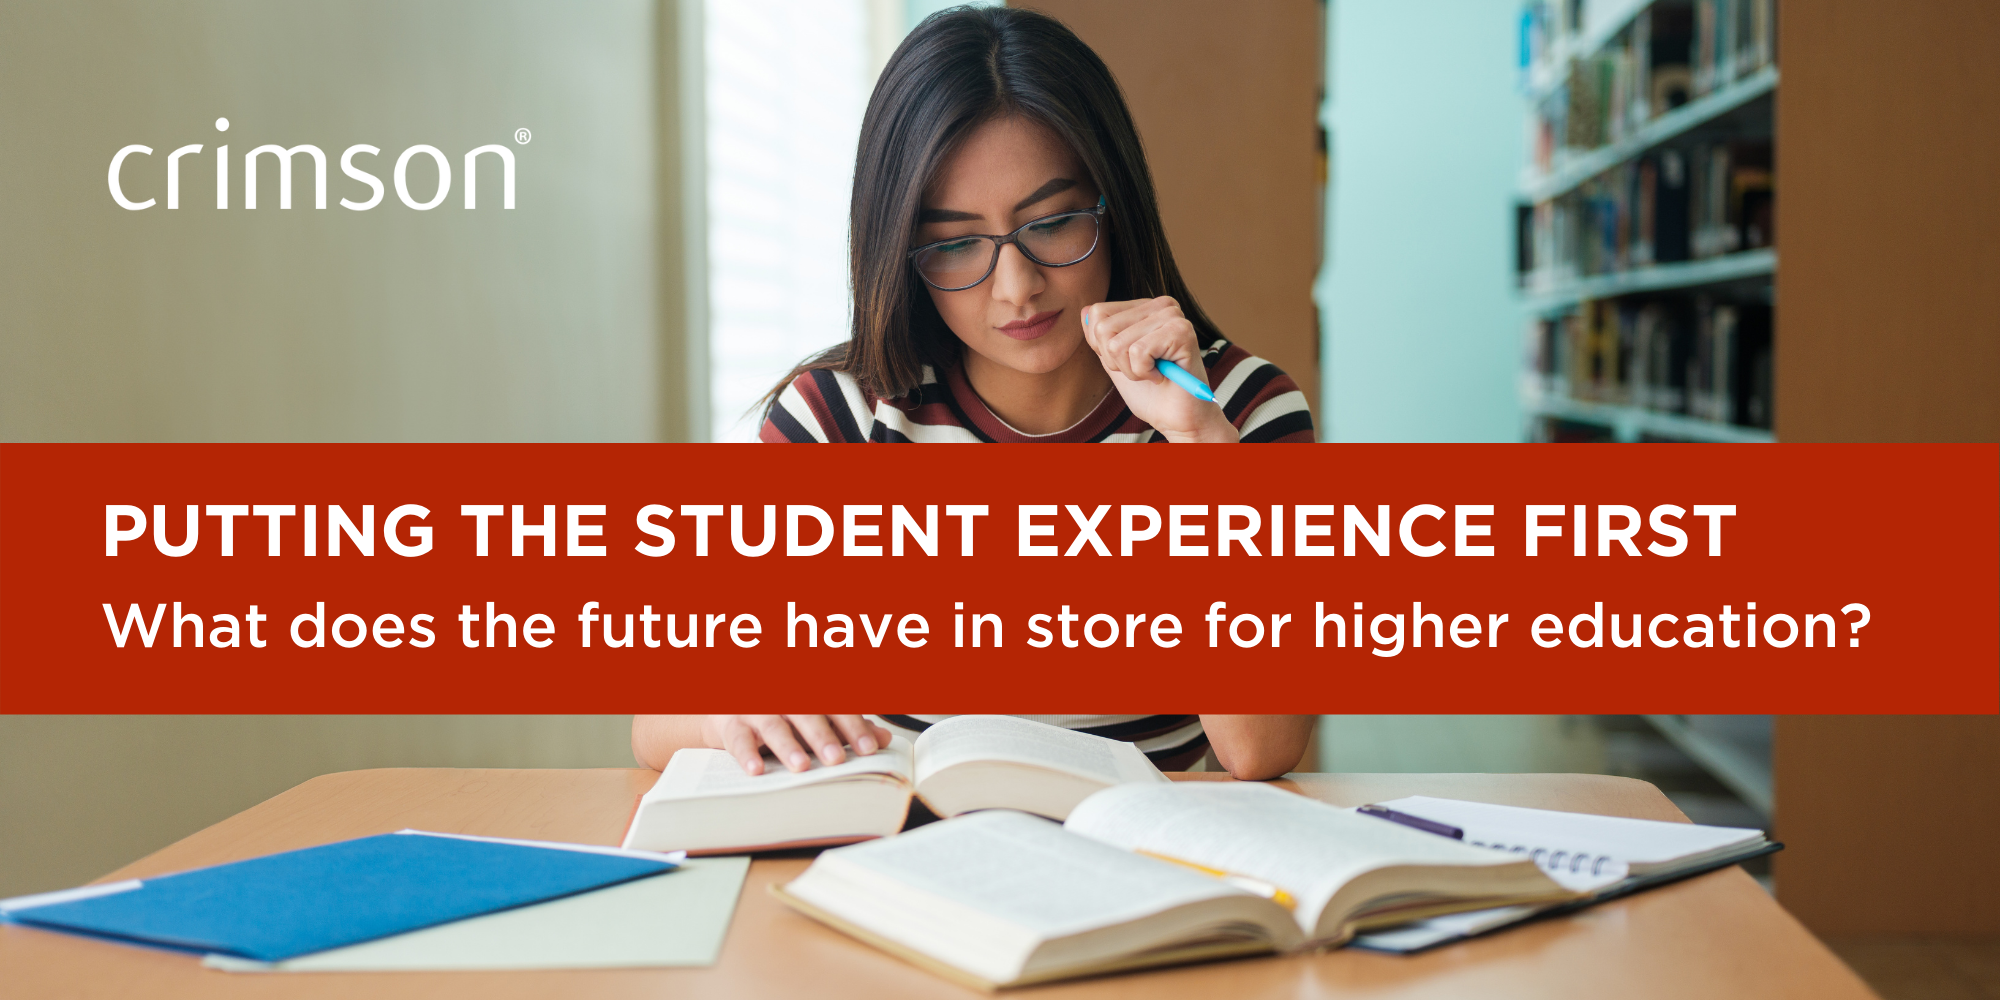 Putting the student experience first – What does the future have in store for higher education?